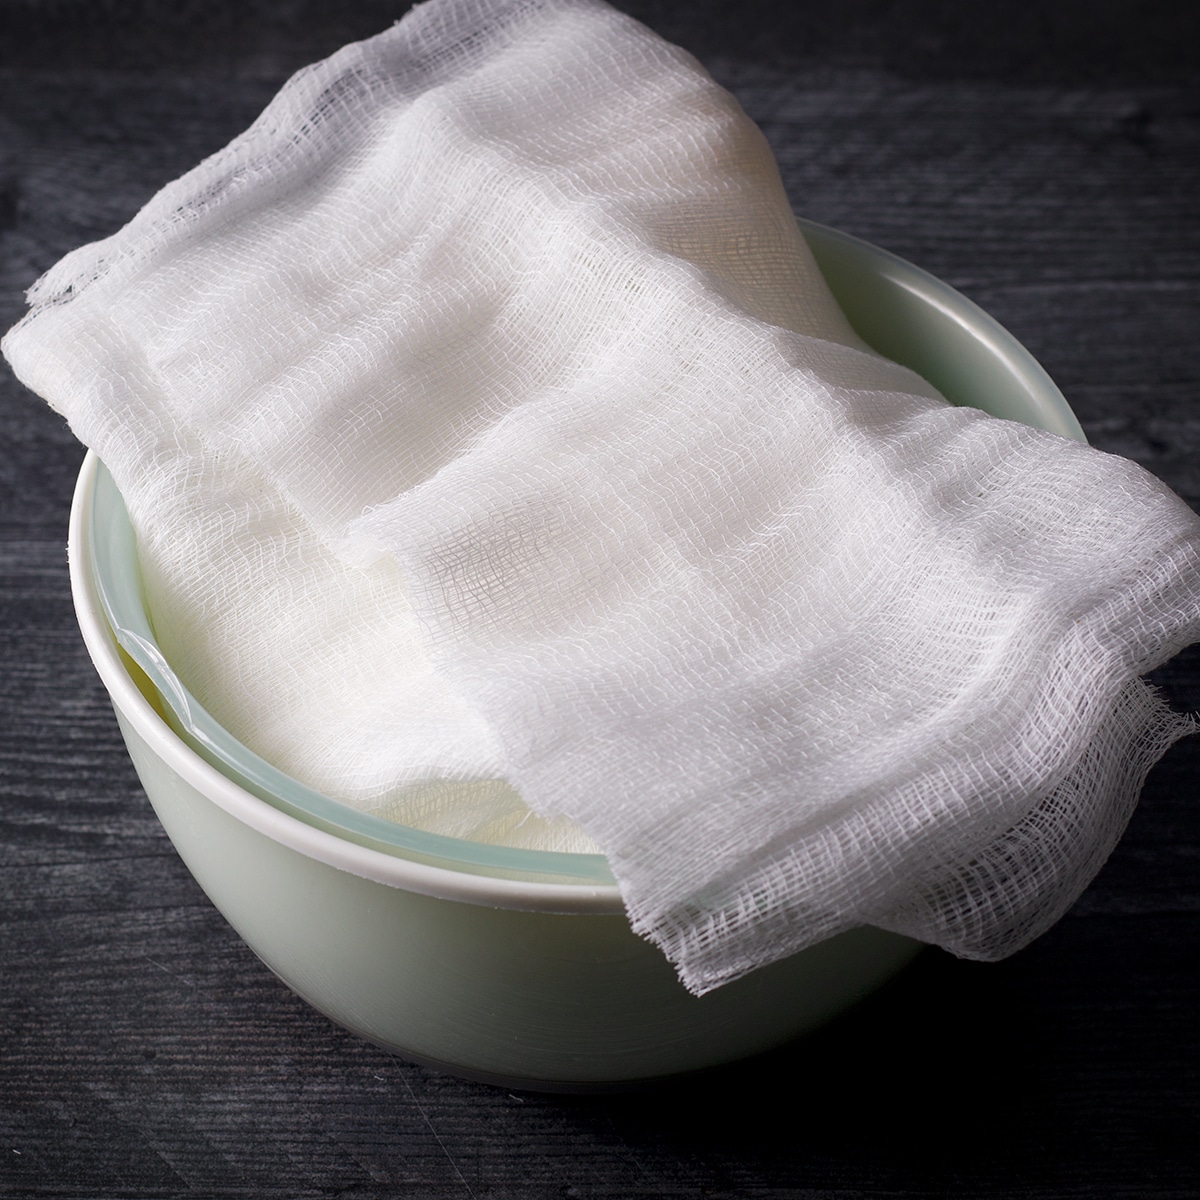 Yogurt wrapped in cheesecloth and set inside a strainer that's set inside a bowl.